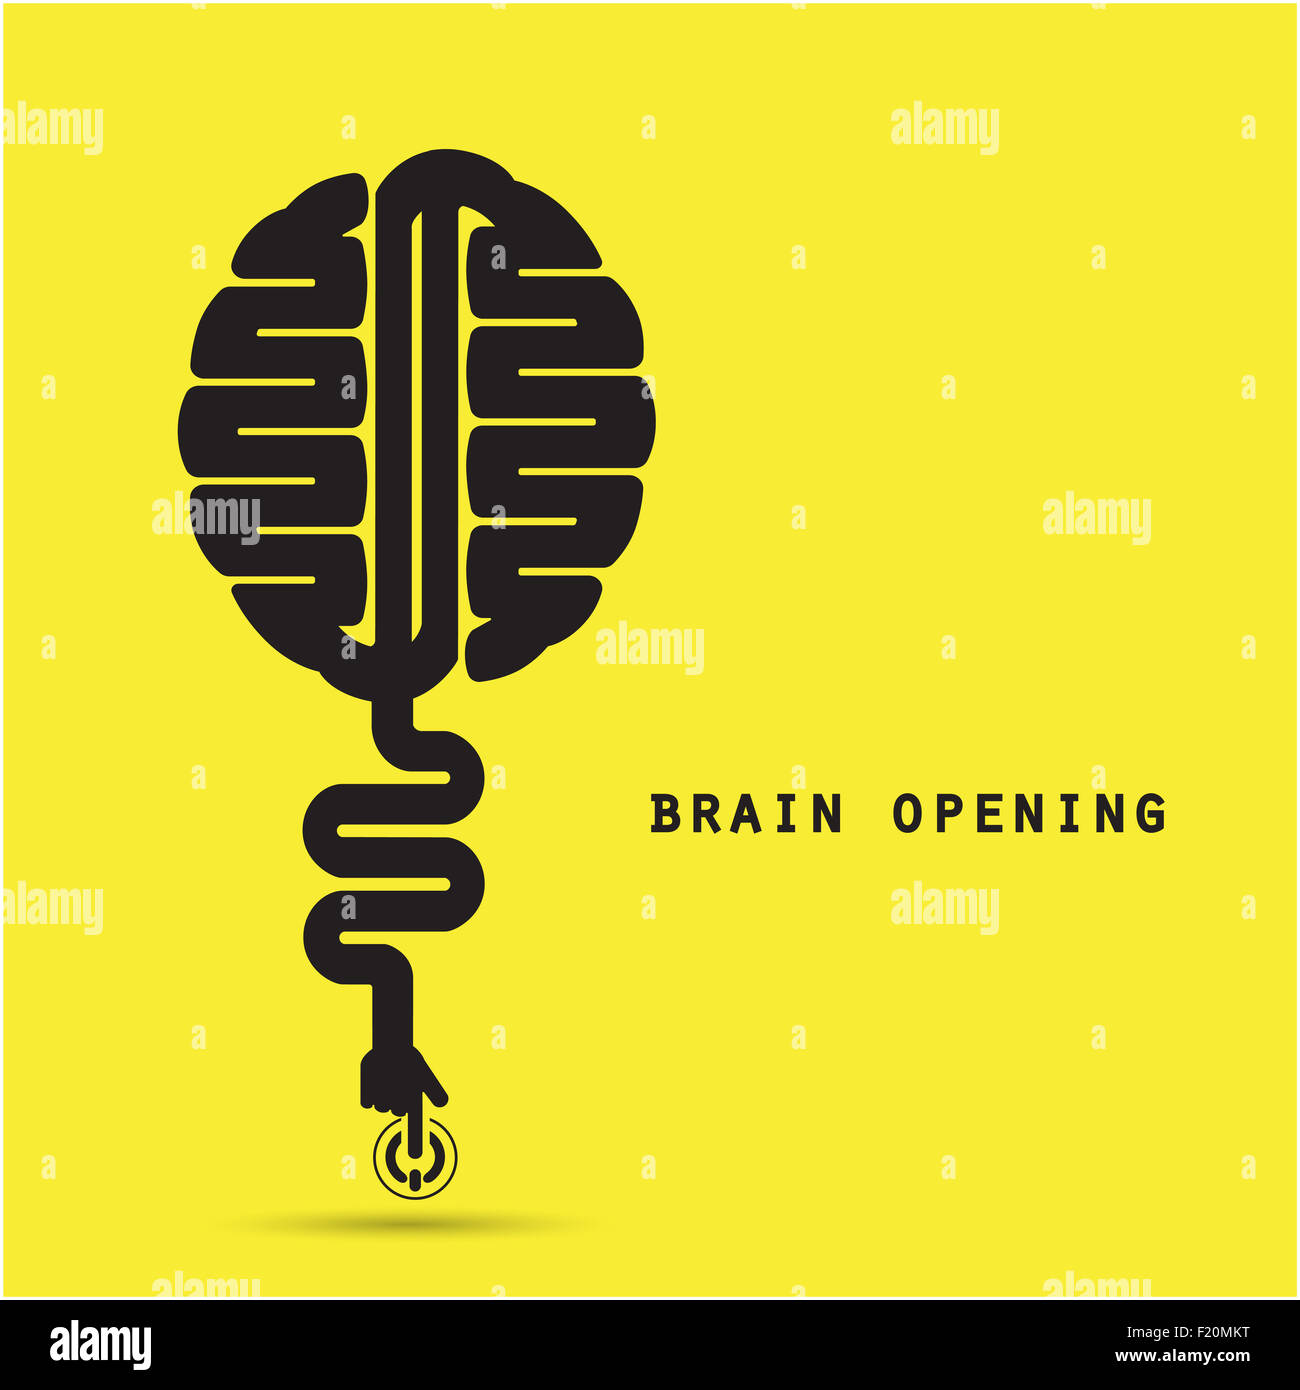 Brain opening concept.Creative brain abstract logo design template. Corporate business industrial creative logotype symbo Stock Photo